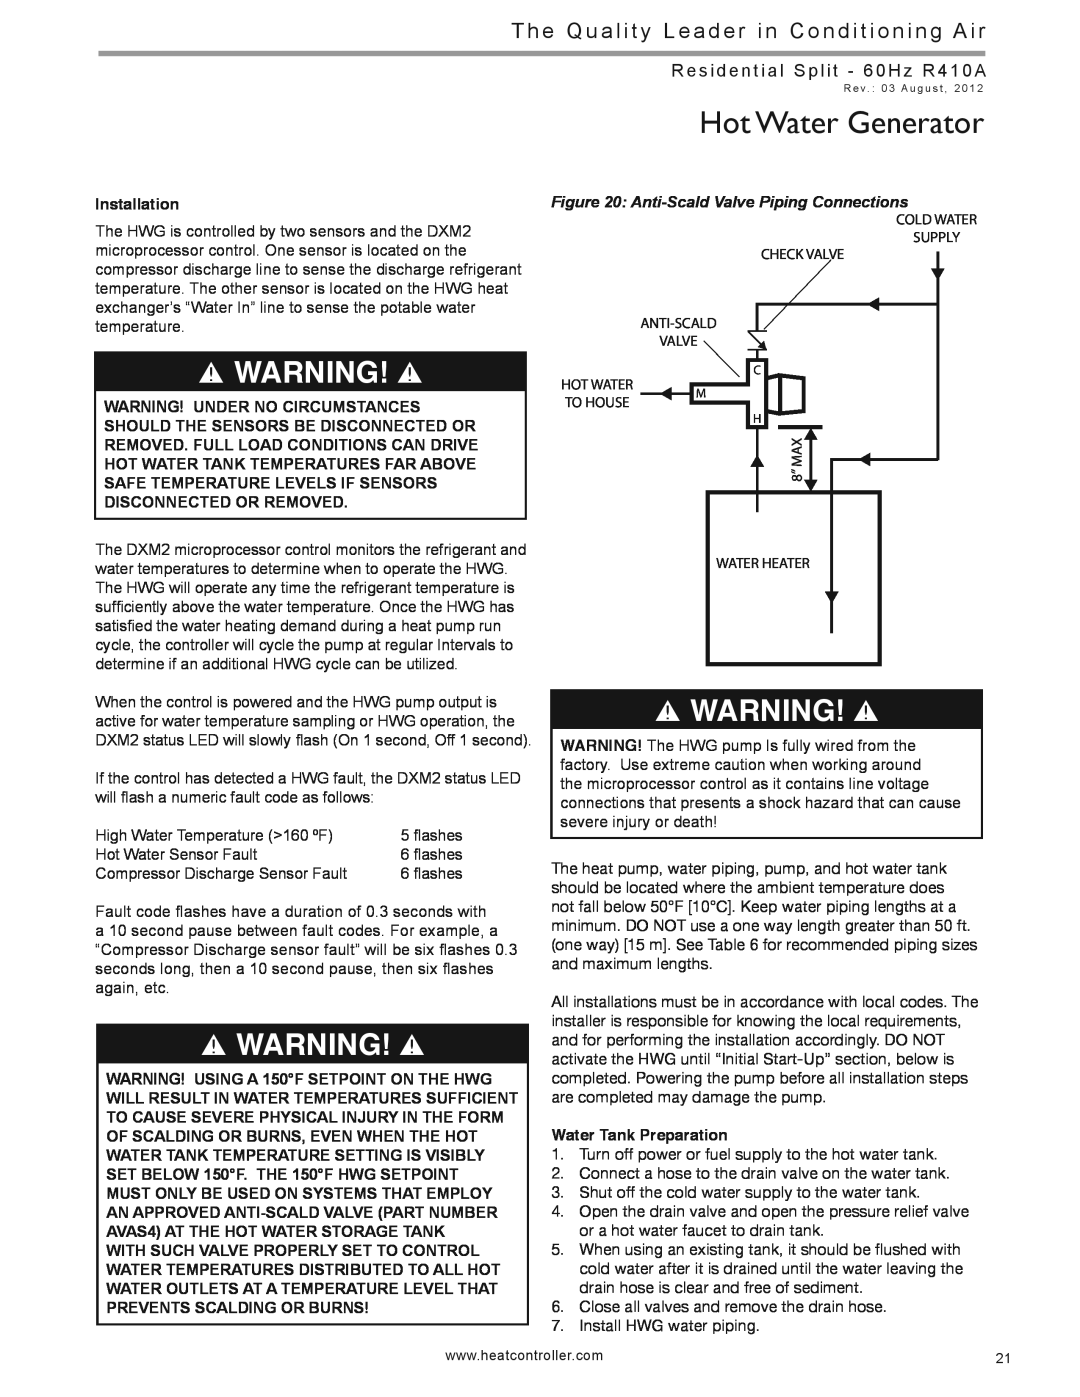 Heat Controller HTS SERIES manual Anti-Scald, Hot Water Generator, Valve Piping, Connections 